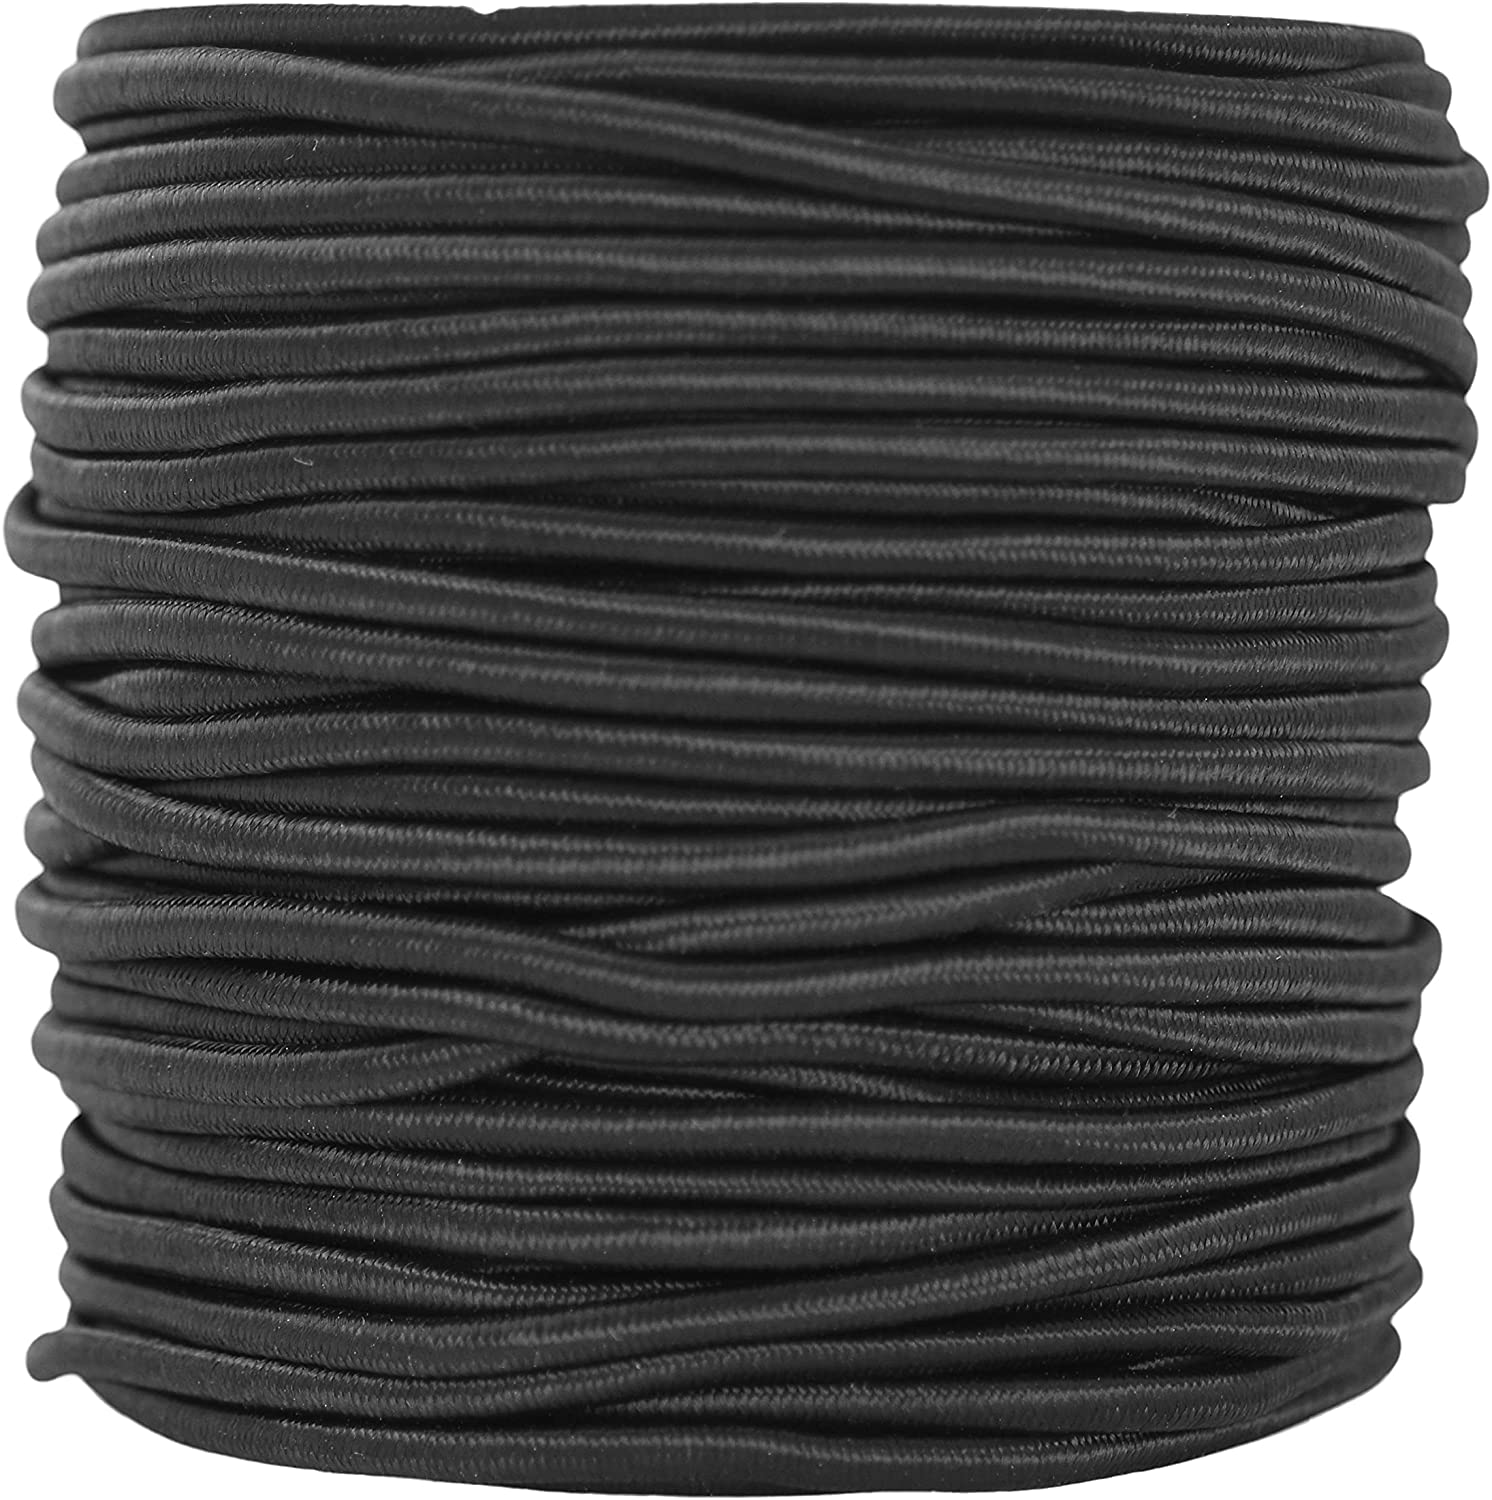 Polyester Twisted Cord 1.5 mm/50 m White Black Cord for Fishing